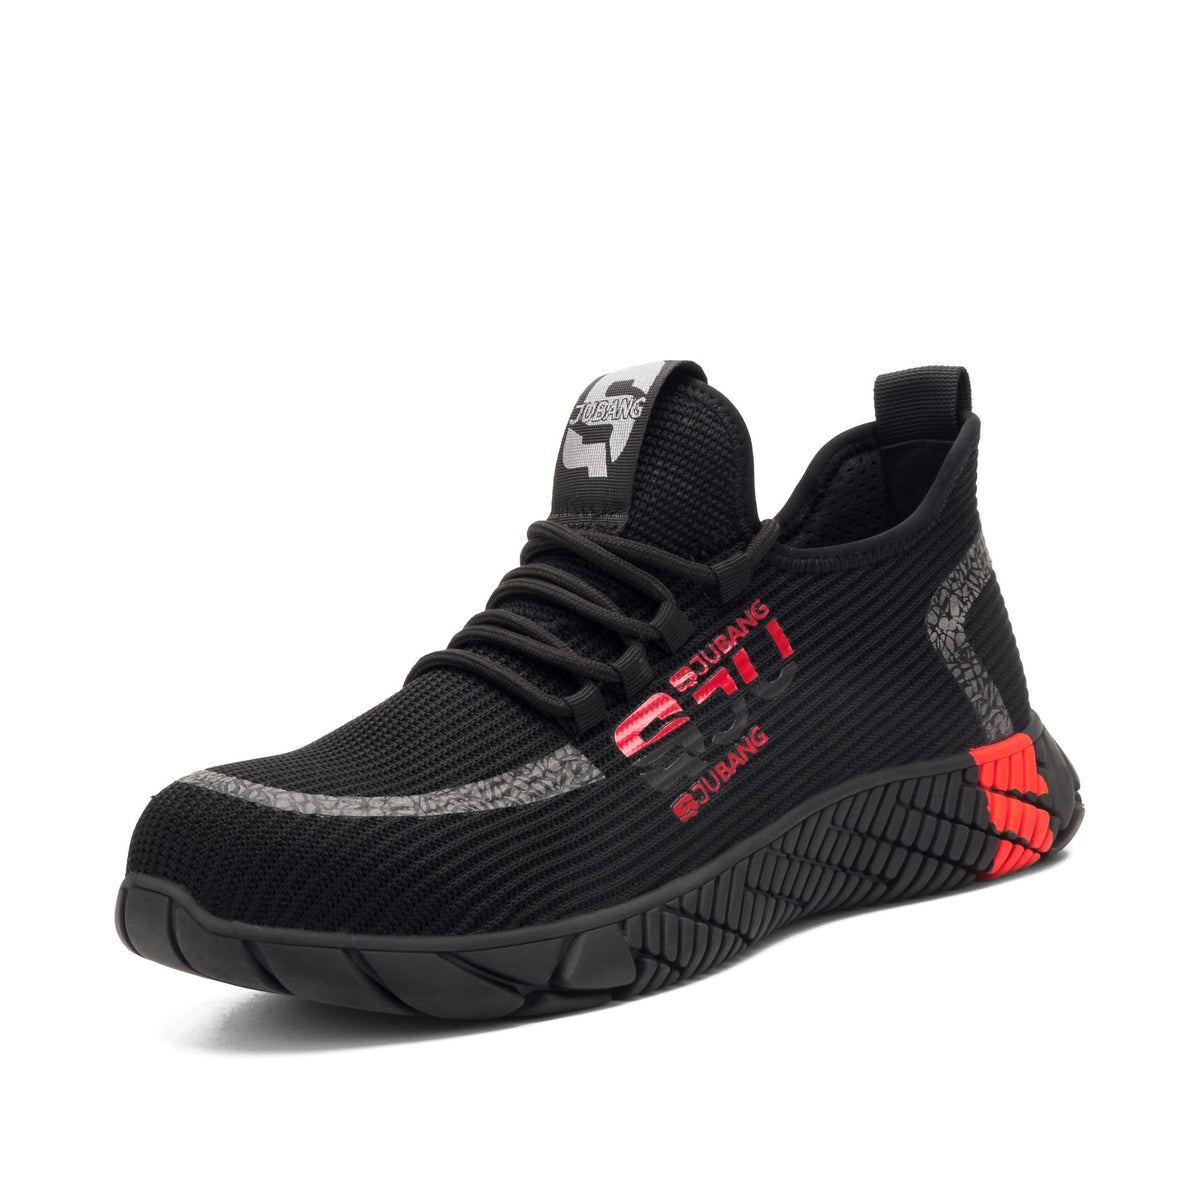 S Series Black Red - Indestructible Shoes